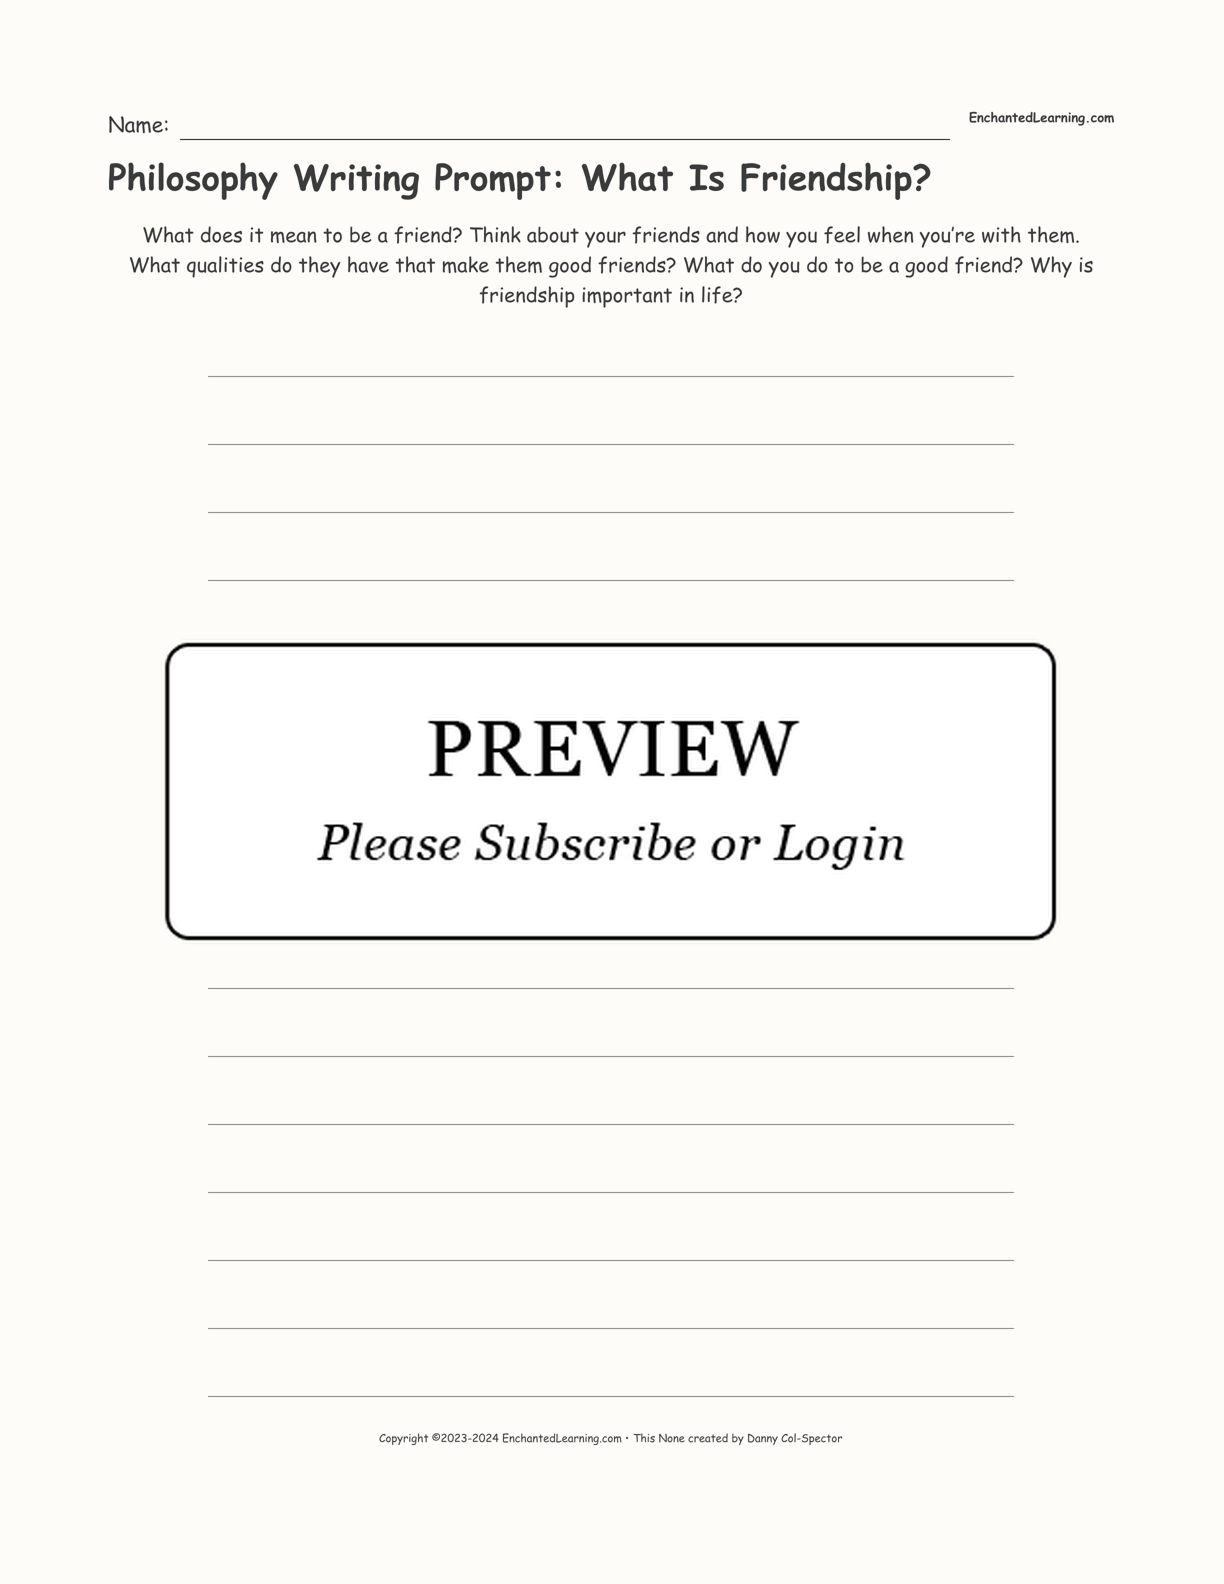 Philosophy Writing Prompt: What Is Friendship? interactive printout page 1